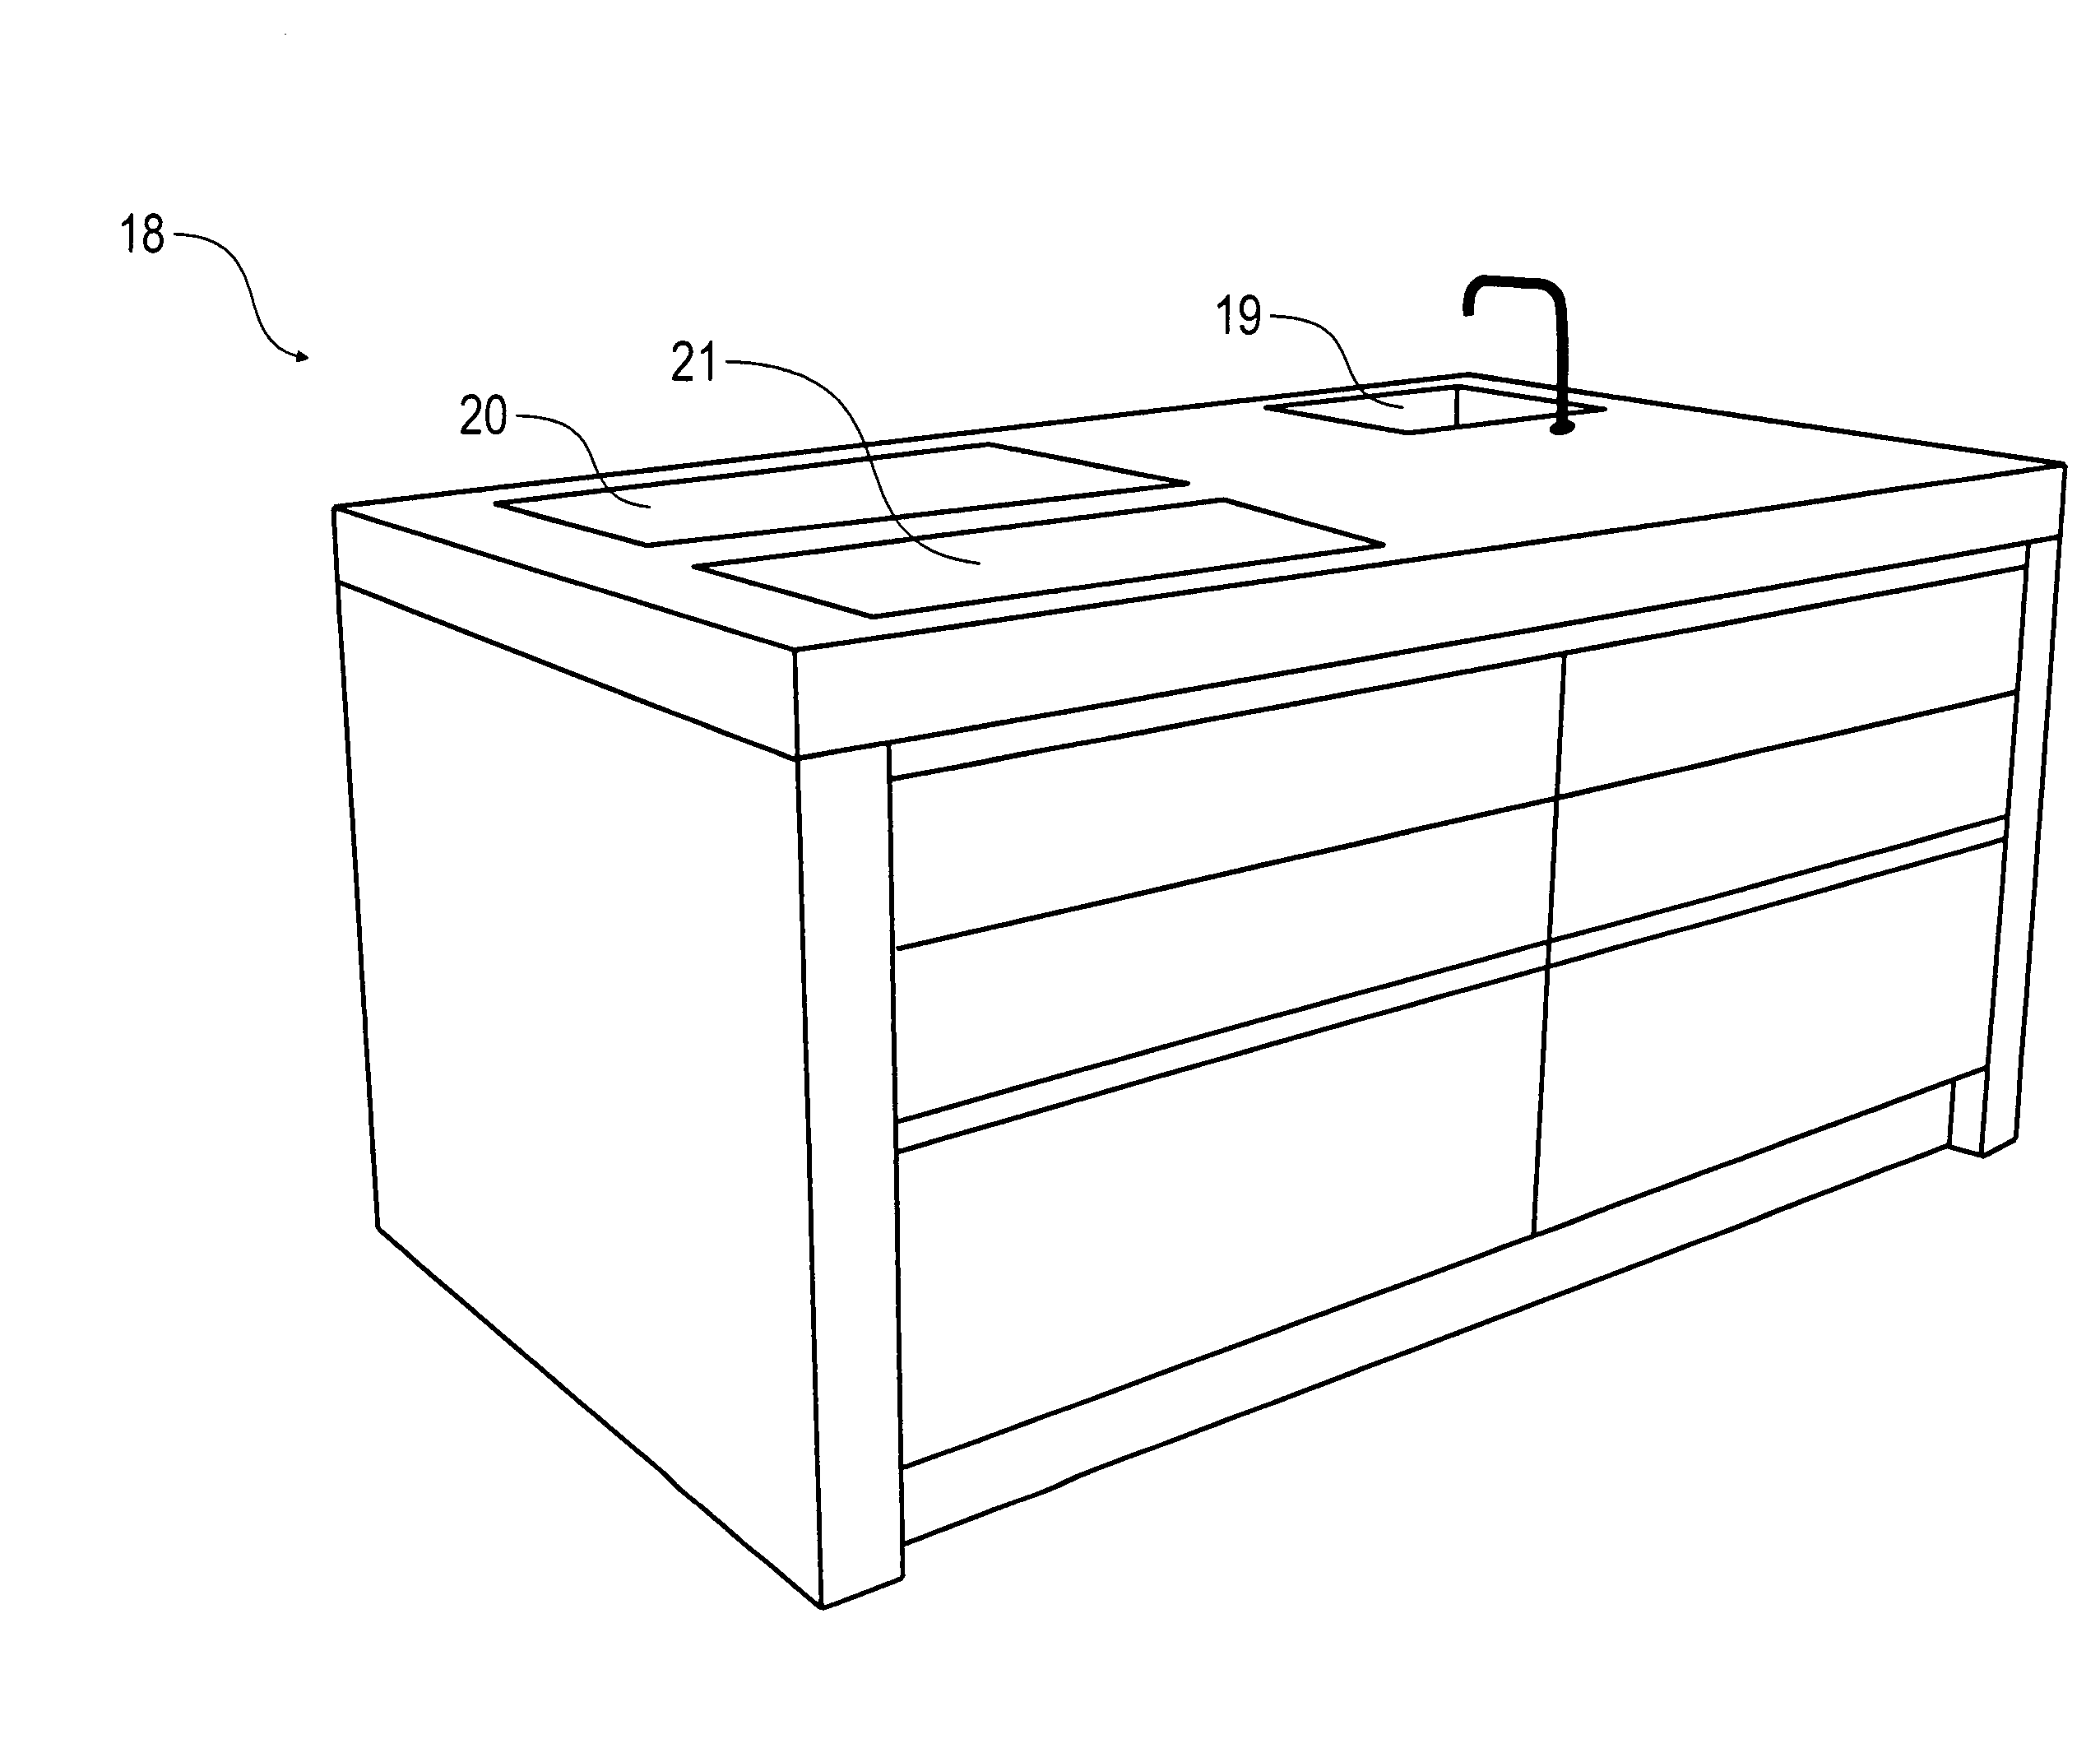 Appliance, particularly kitchen appliance or laboratory table and deodorant device